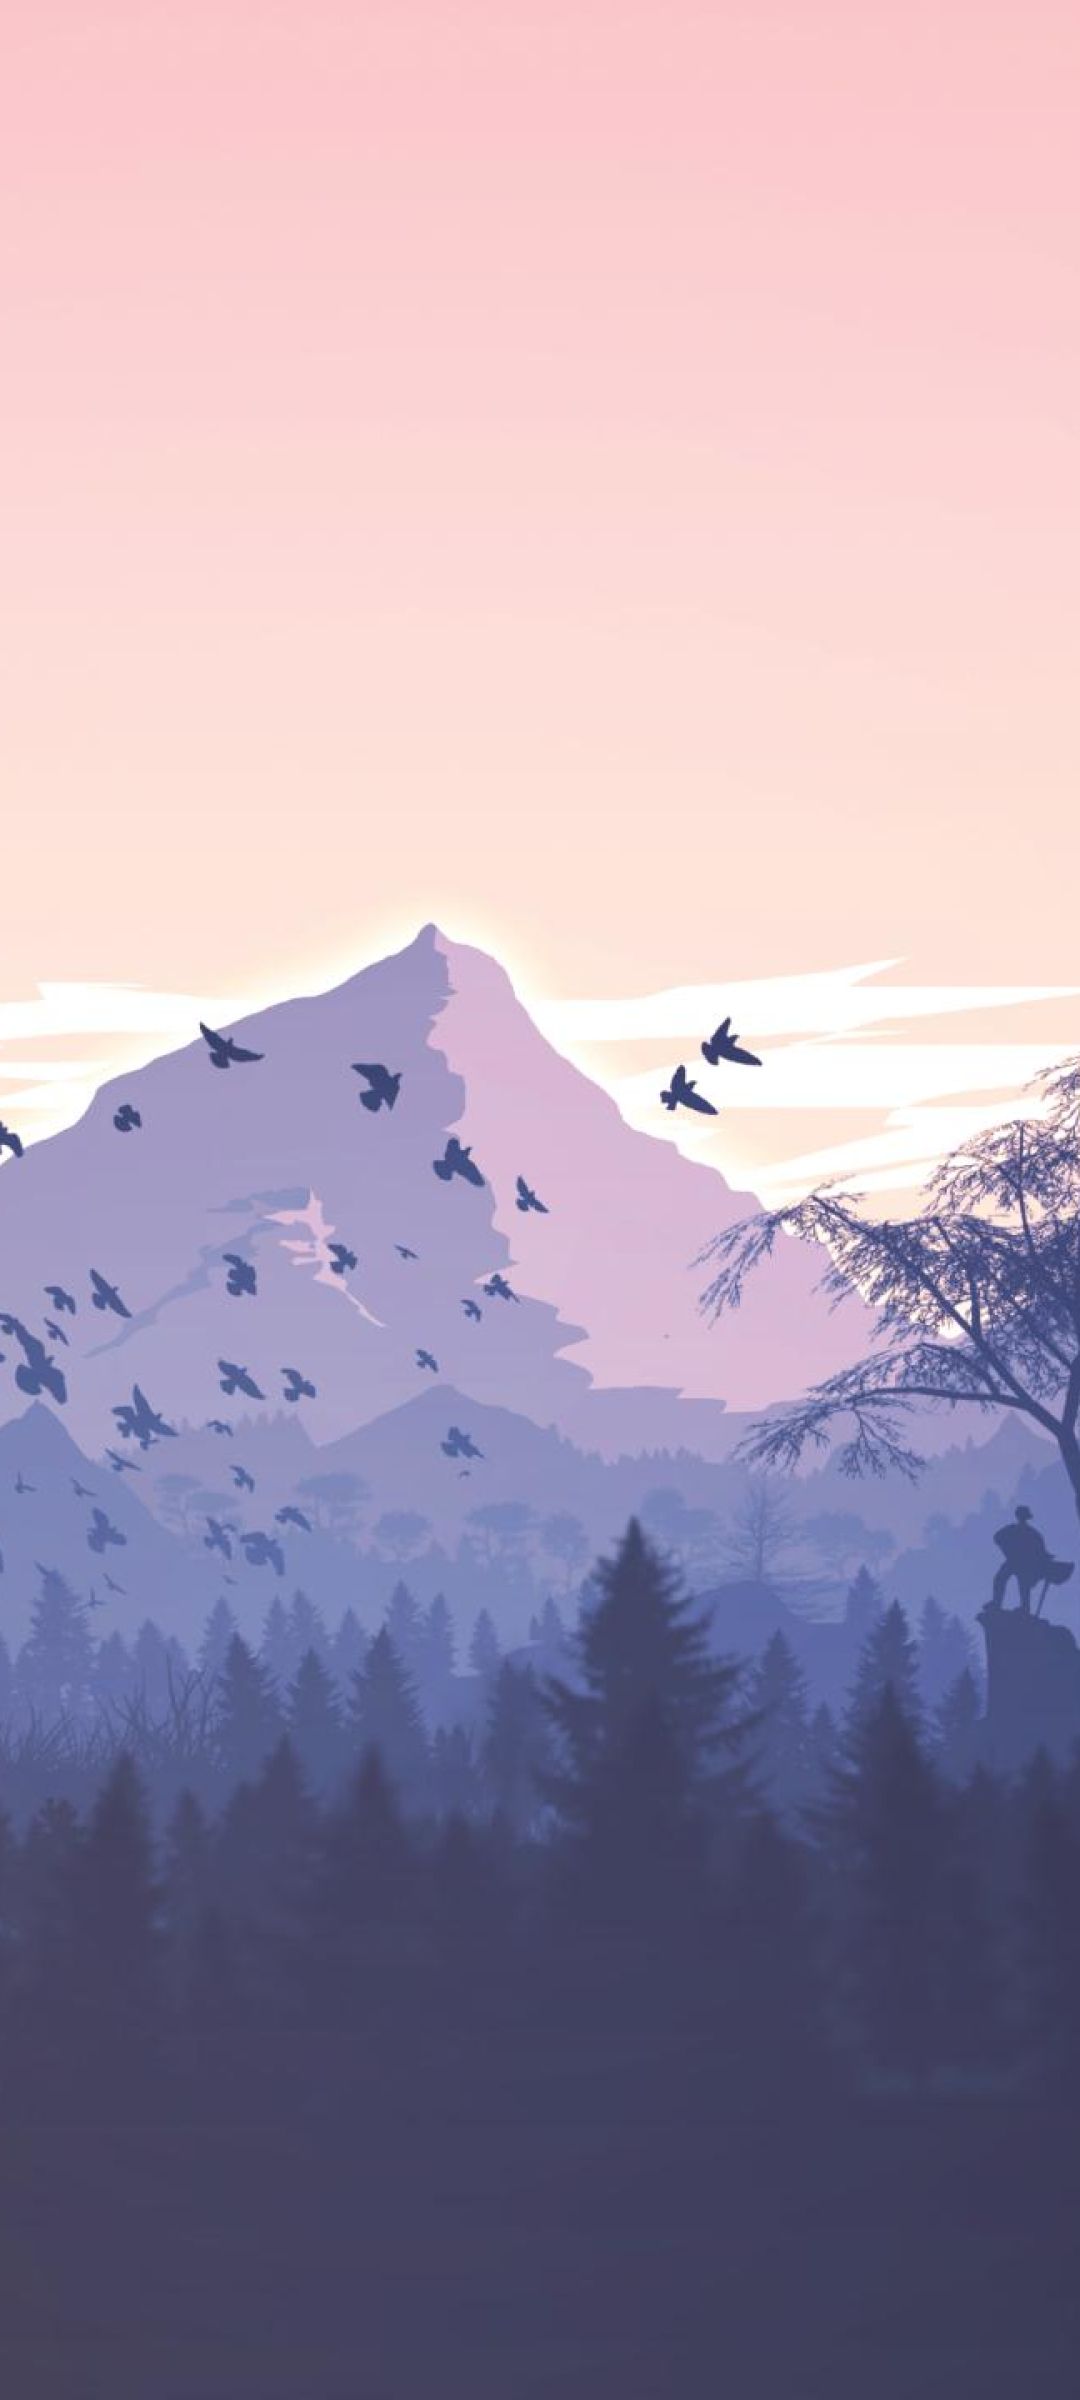 Free download 1080x2400 Minimalism Birds Mountains Trees Forest